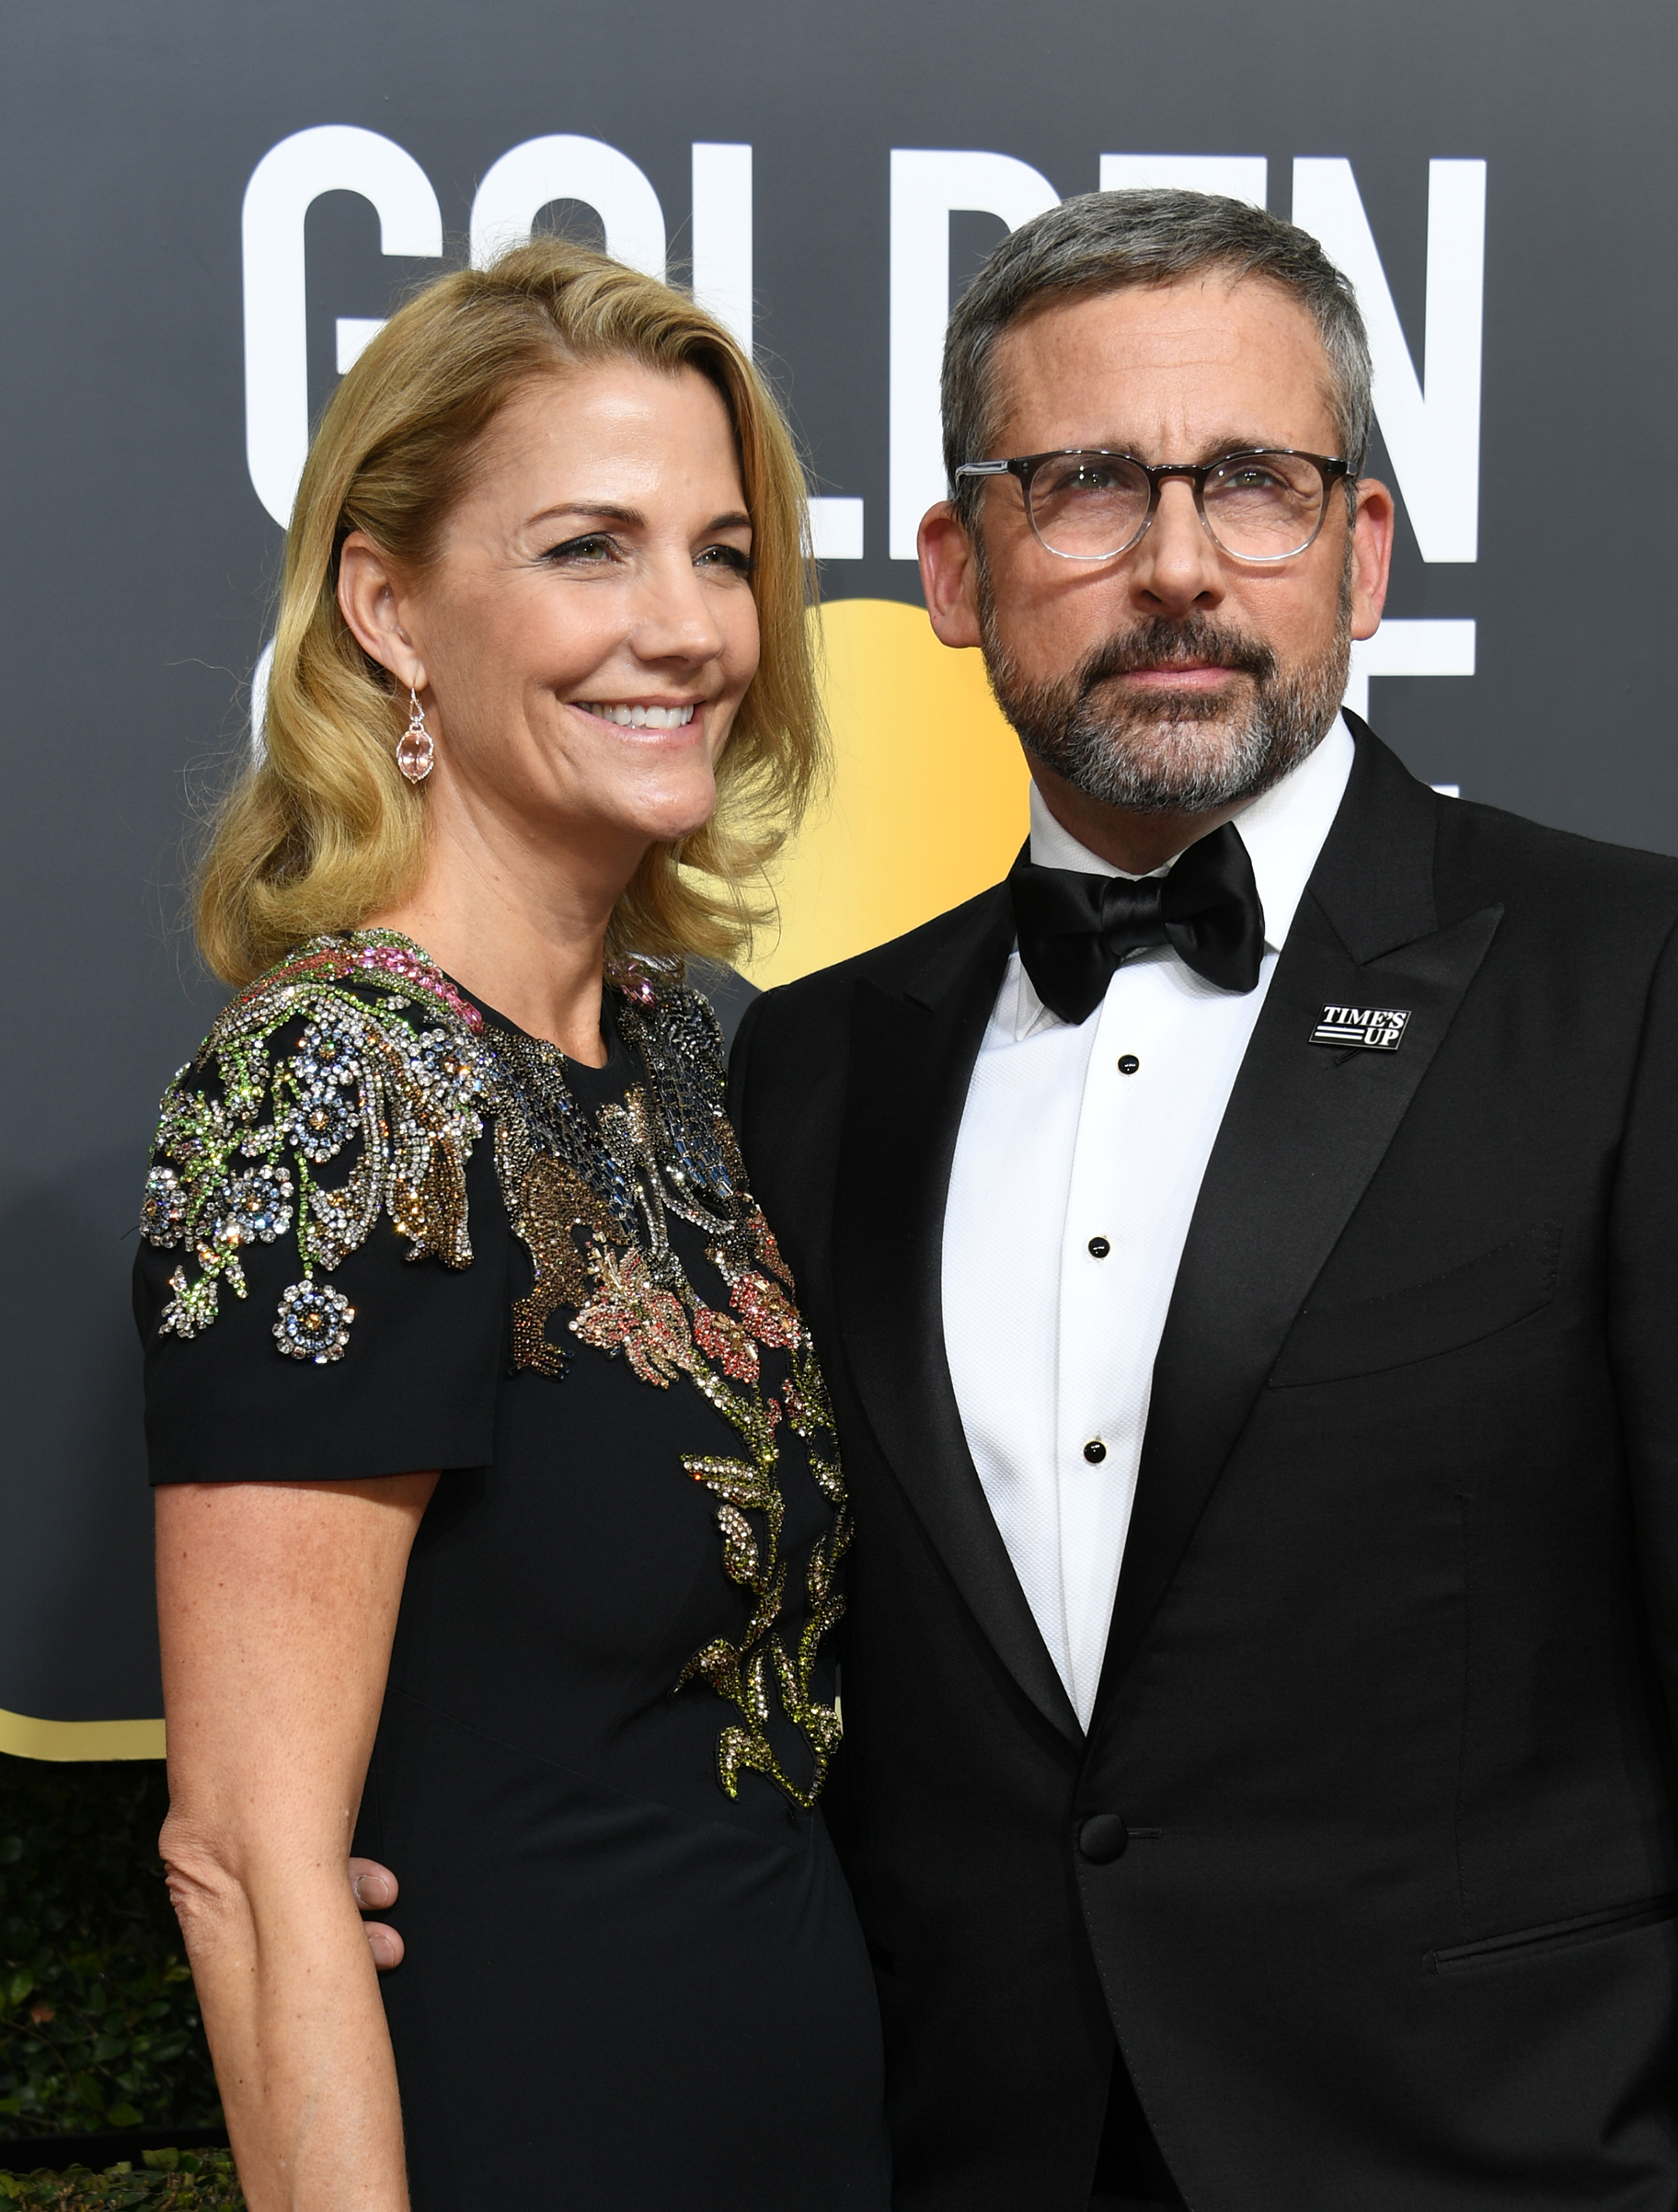 Nancy and Steve Carell arrive for the 75th Golden Globe Awards on January 7, 2018, in Beverly Hills, California. (Valerie Macon—AFP/Getty Images)